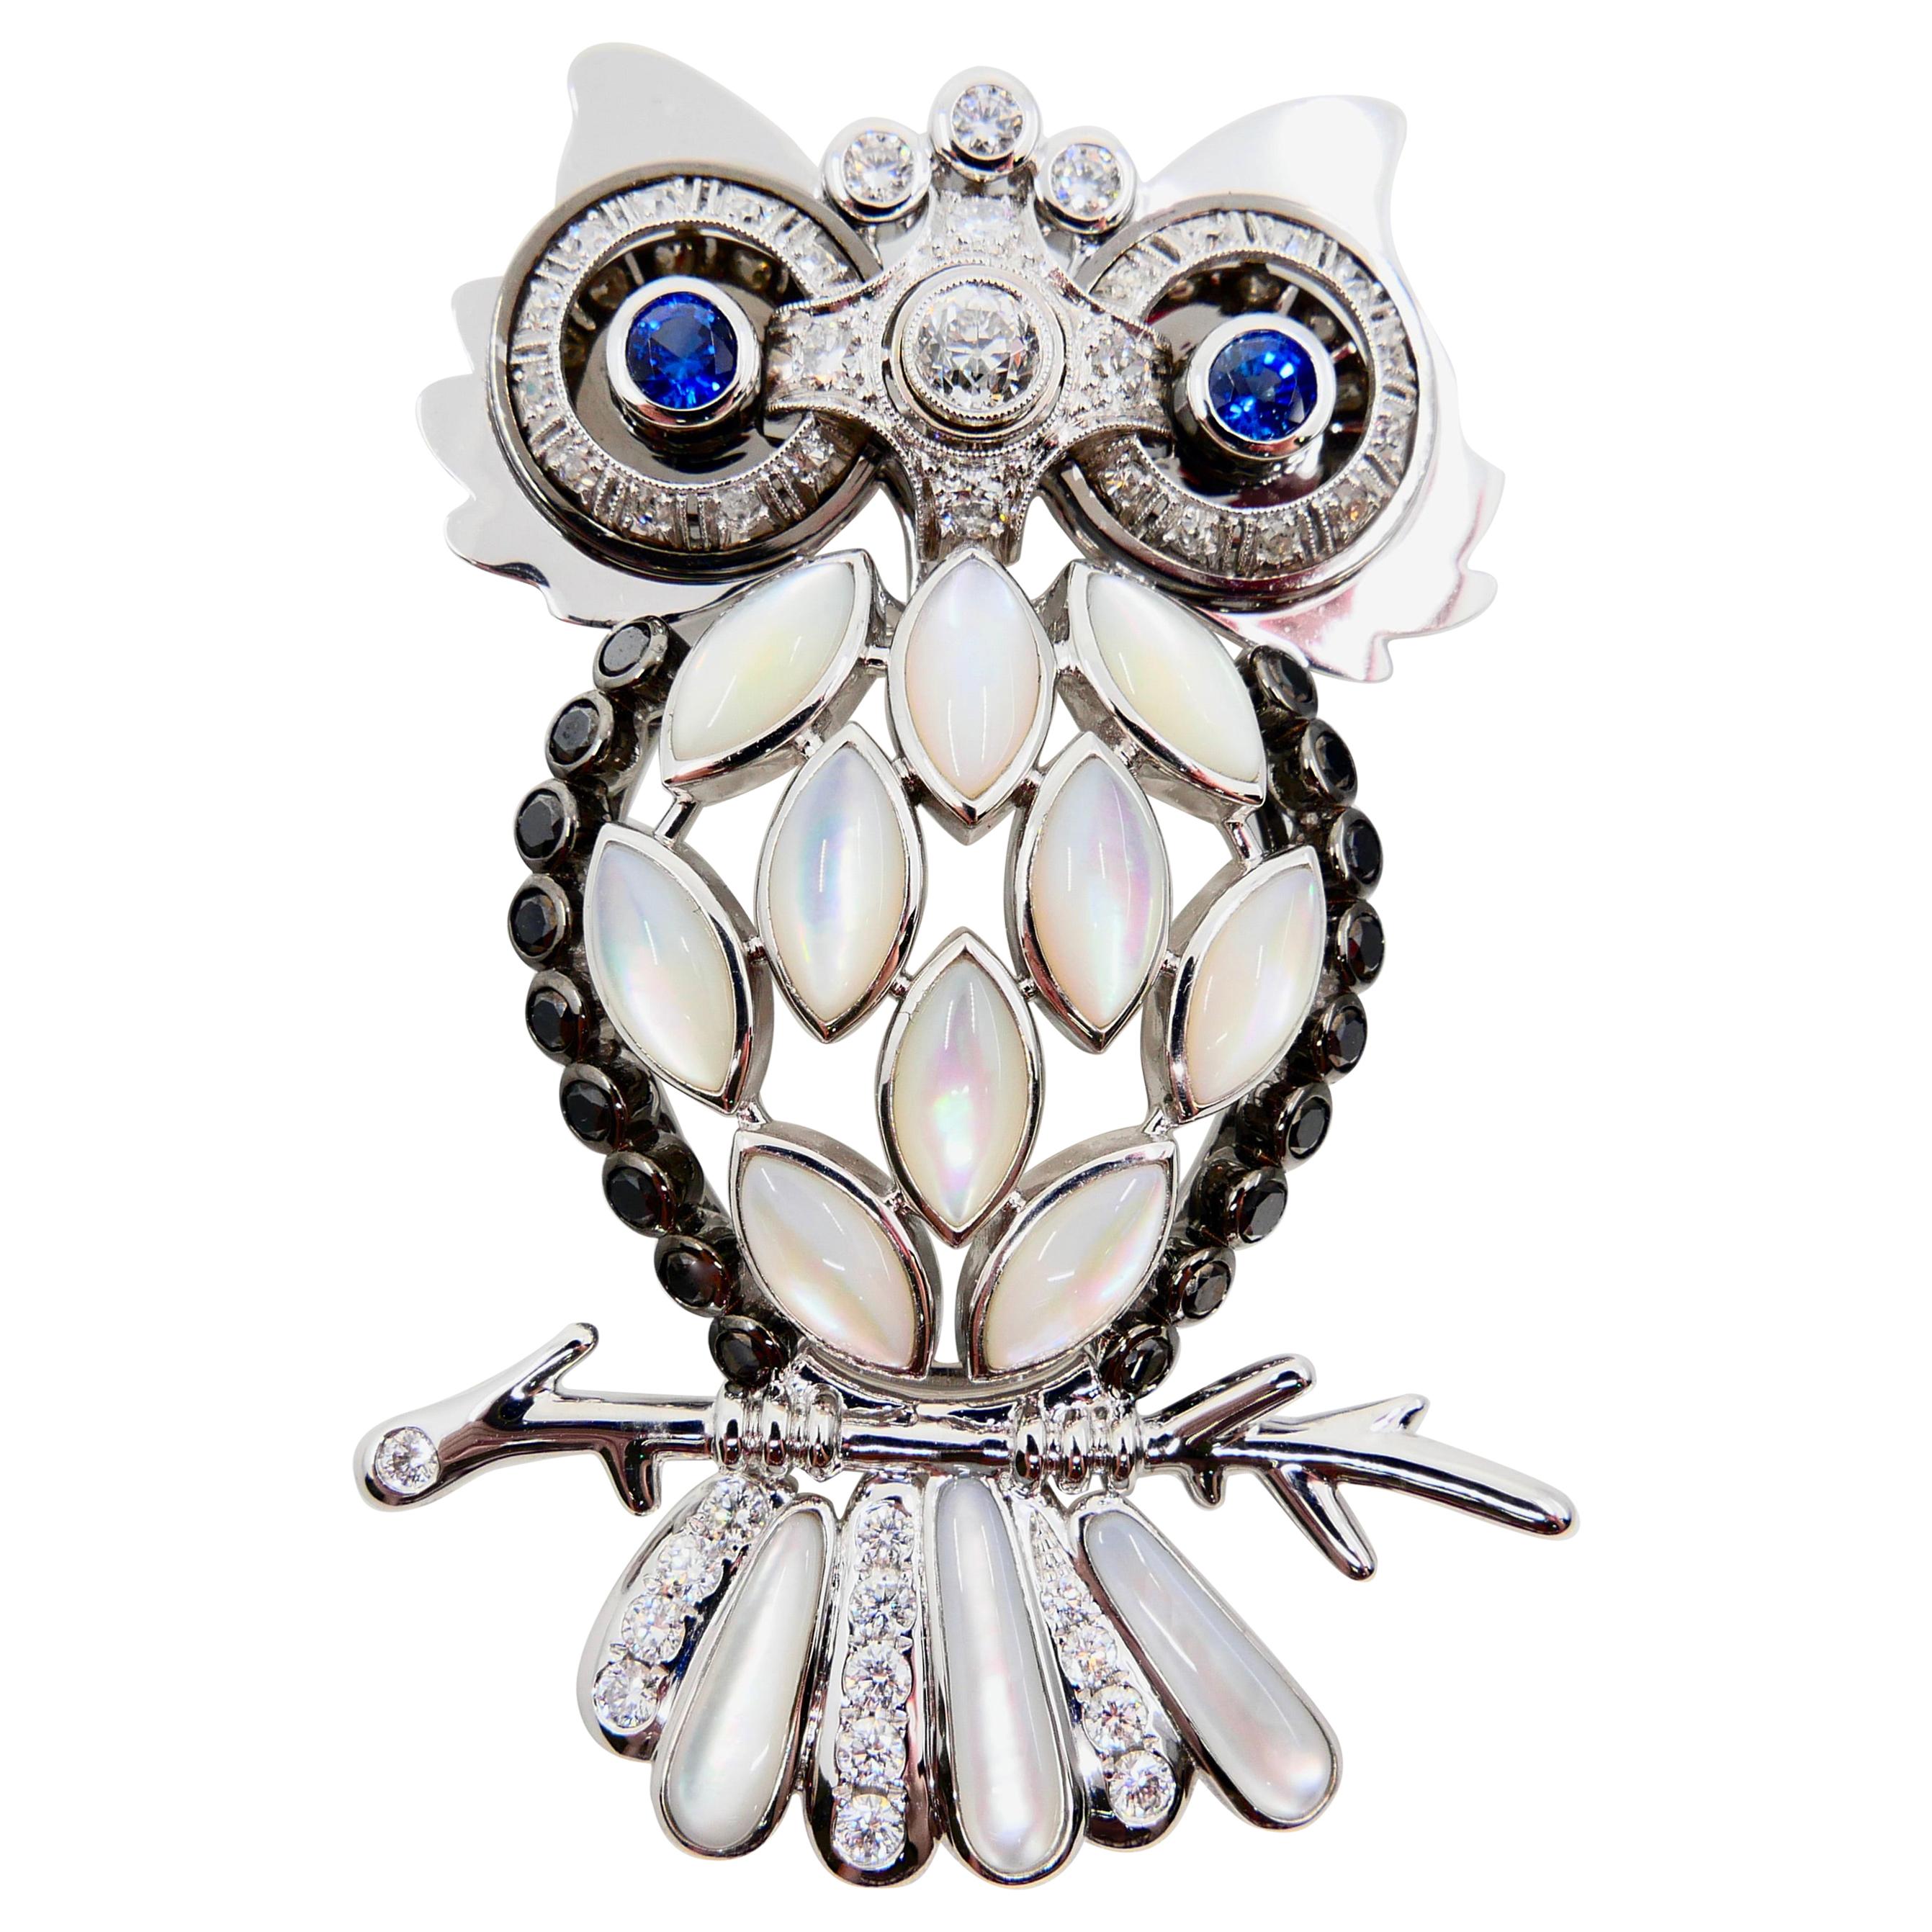 Old Cut and Black Diamonds, Sapphires, White Mother of Pearl Owl Brooch/Pendant